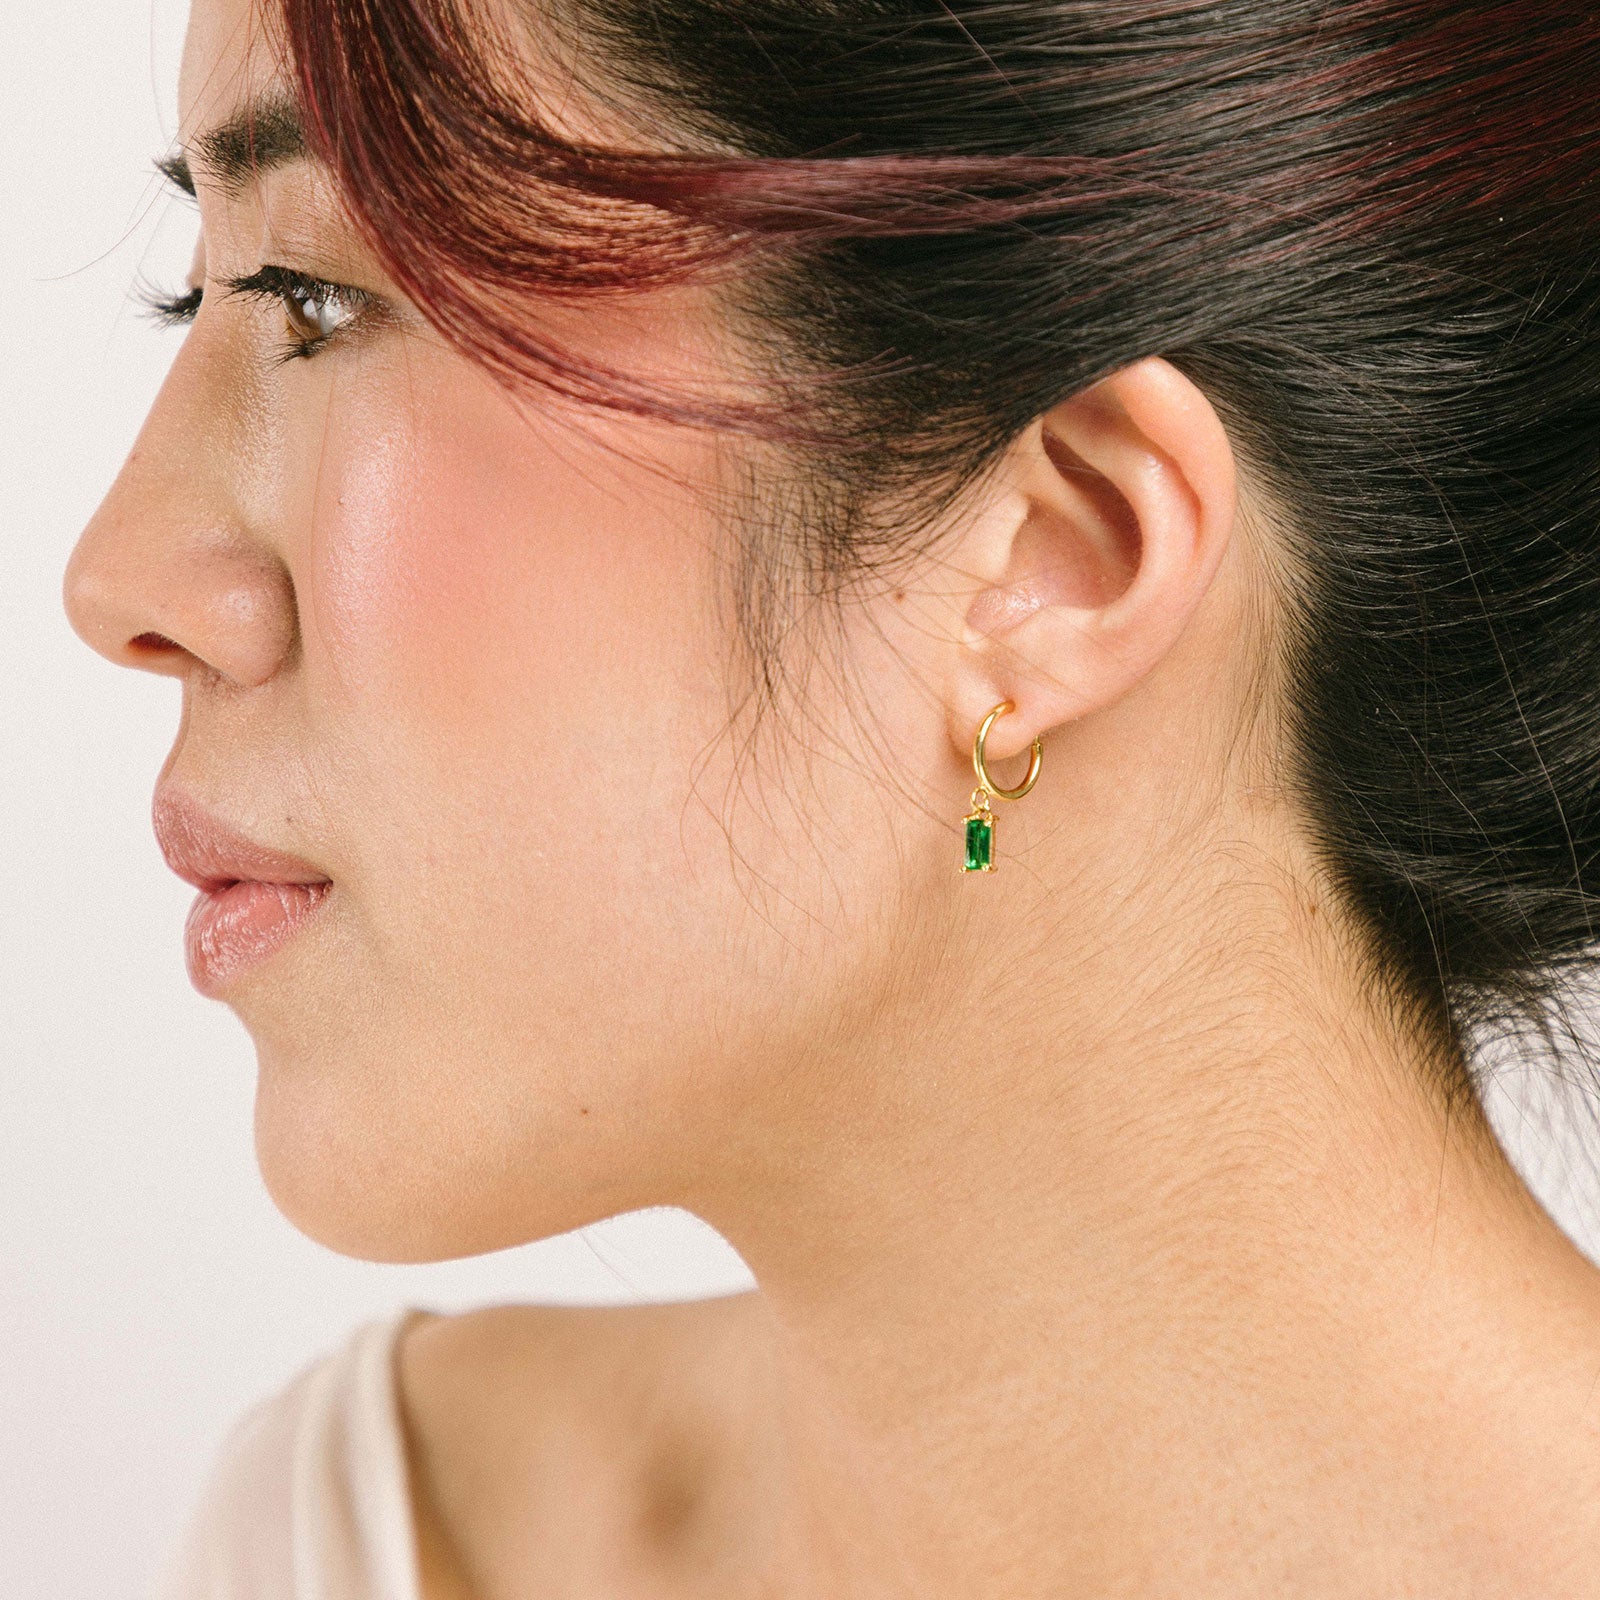 A model wearing the Rectangle Gem Clip-On Earrings offer a reliable, secure fit, thanks to their sliding spring closure. Suited for smaller or thinner earlobes, these earrings will typically remain comfortable for 2-4 hours. With an adjustable design, they will automatically adjust to your ear thickness. Each pair is crafted from brass and cubic zirconia.